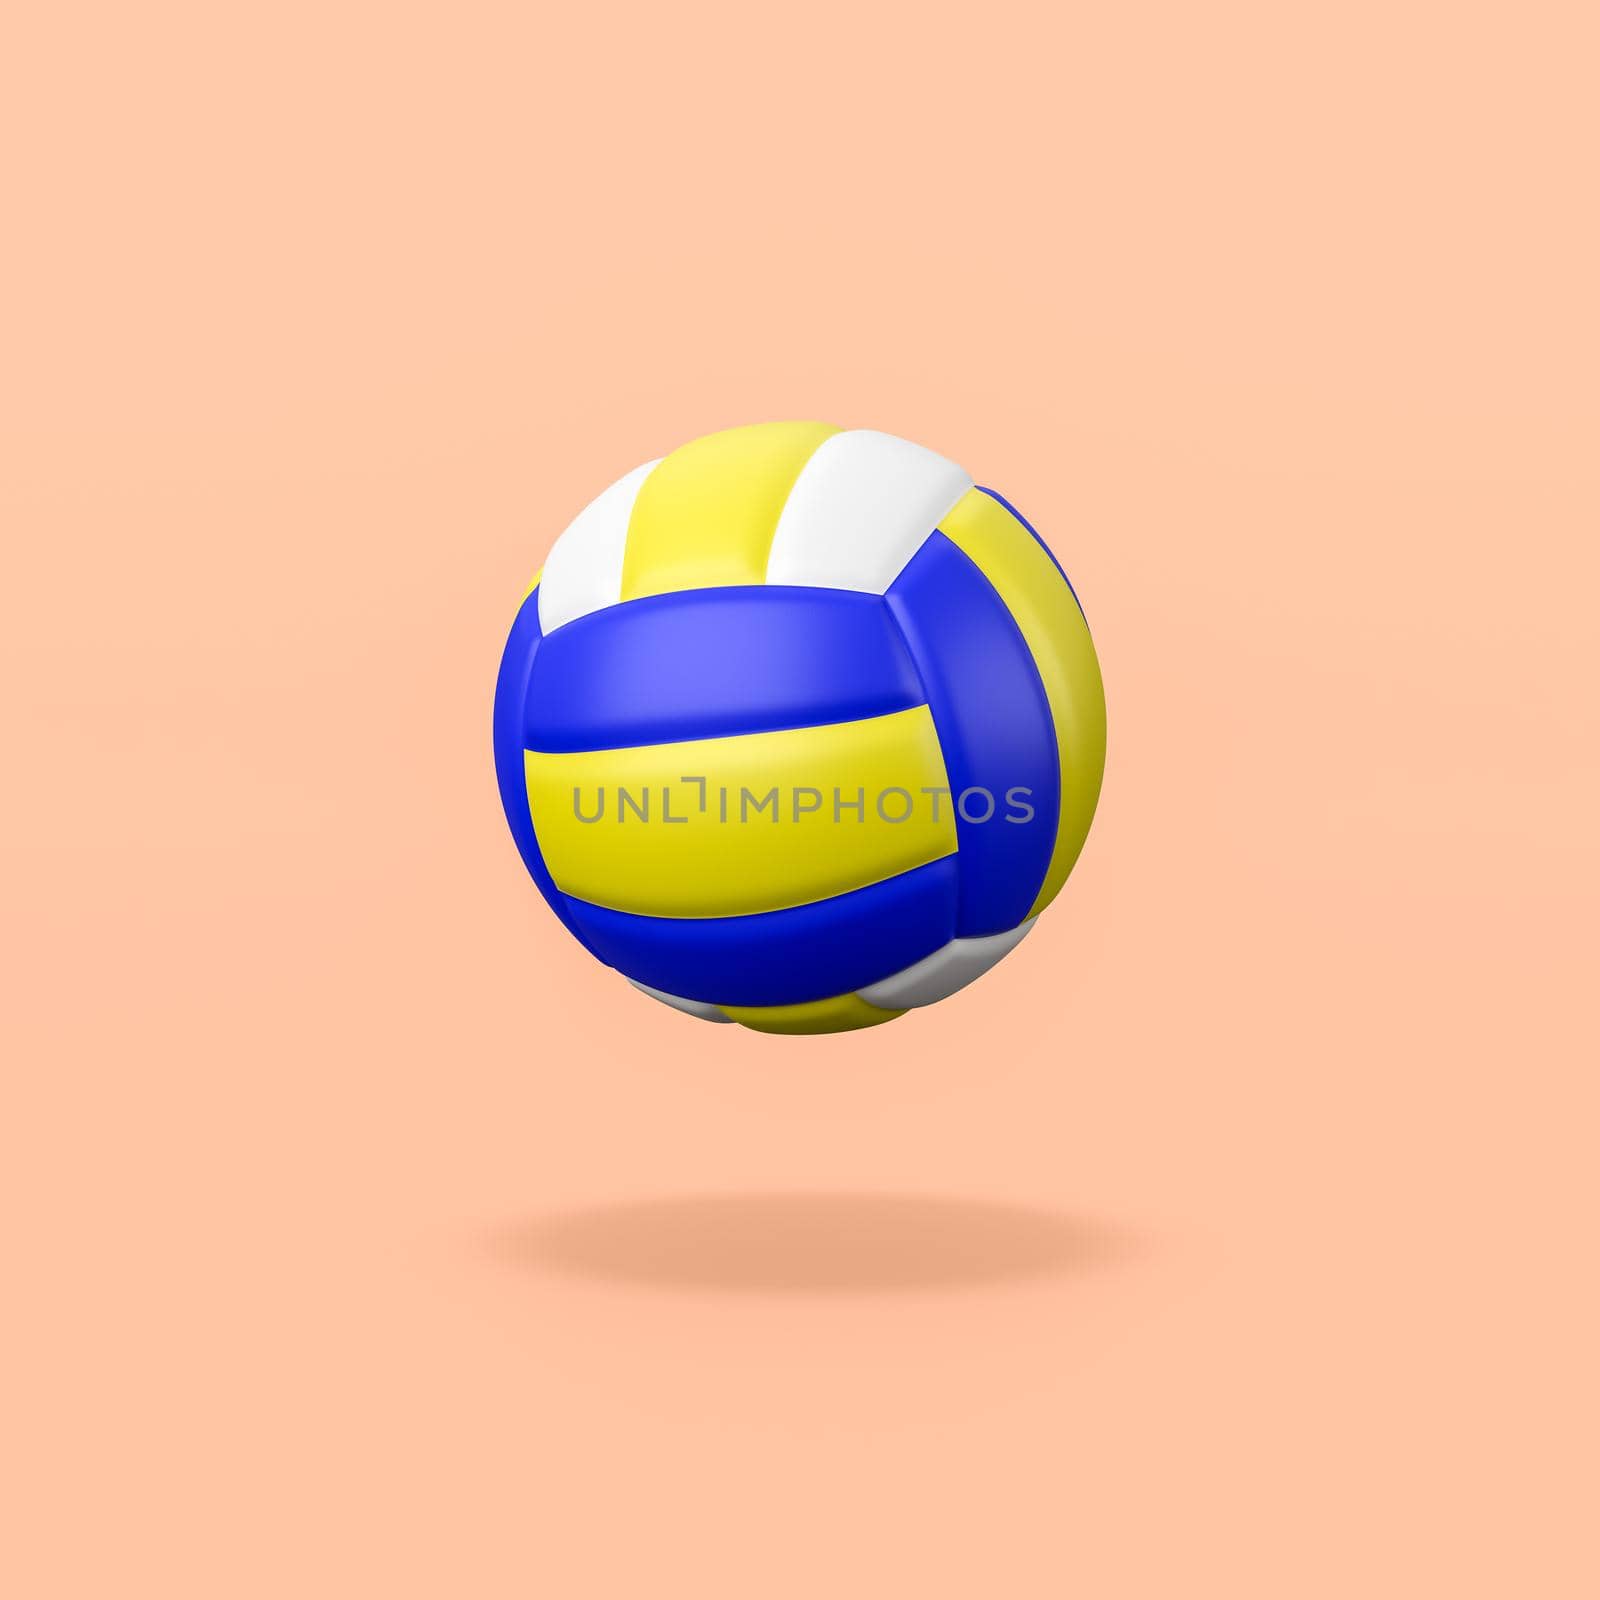 Volleyball Ball Isolated on Flat Orange Background with Shadow 3D Illustration